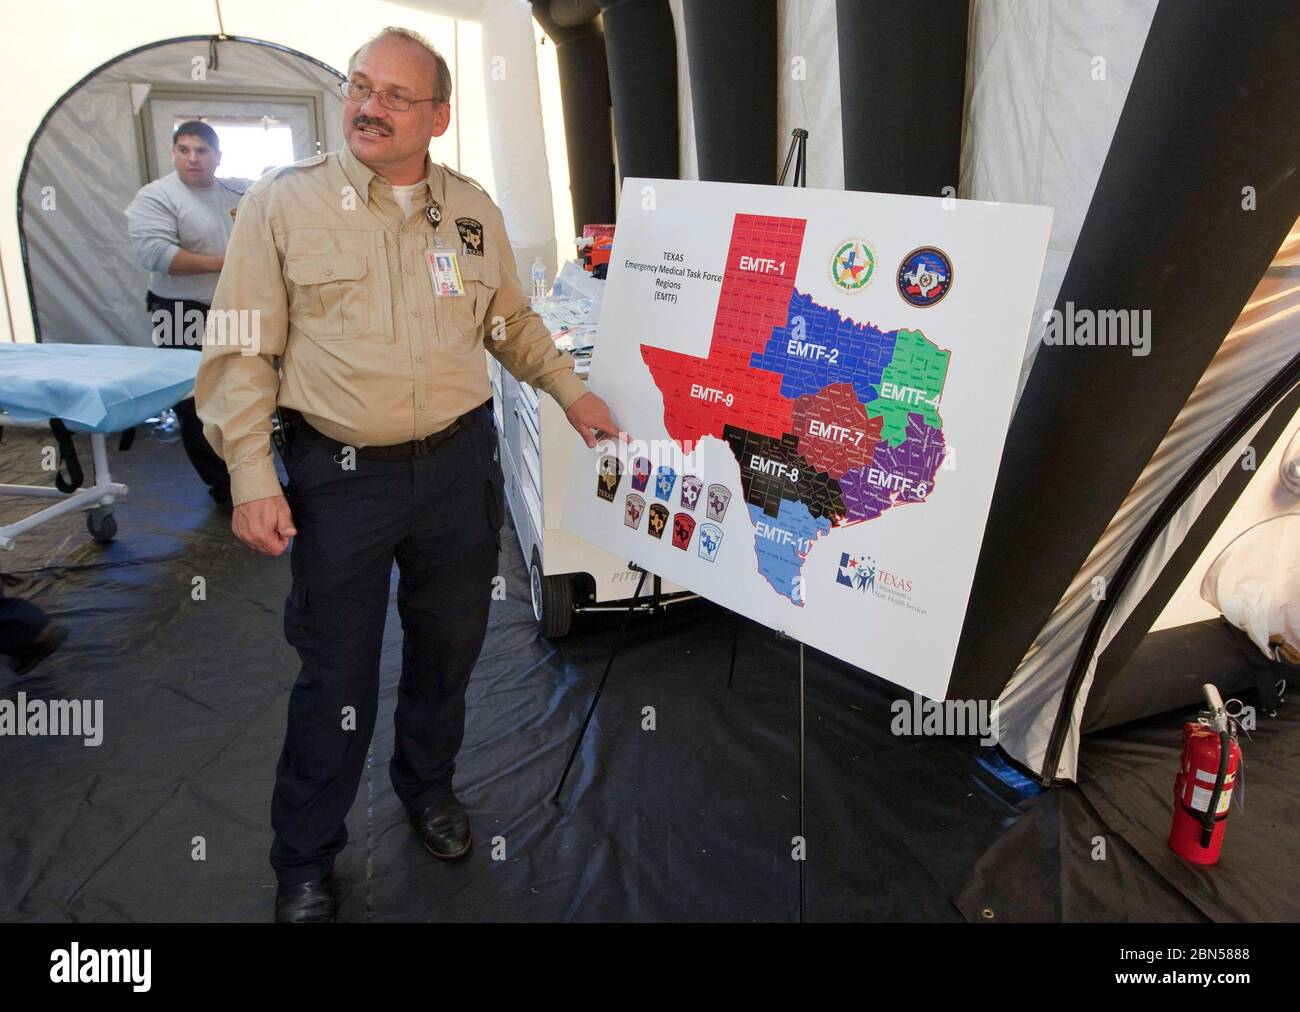 Austin Texas USA, June 1 2012: Member Texas's emergency management office shows a map of the state's emergency districts at a press conference at a mobile medical facility during a hurricane preparedness drill. ©Bob Daemmrich Stock Photo